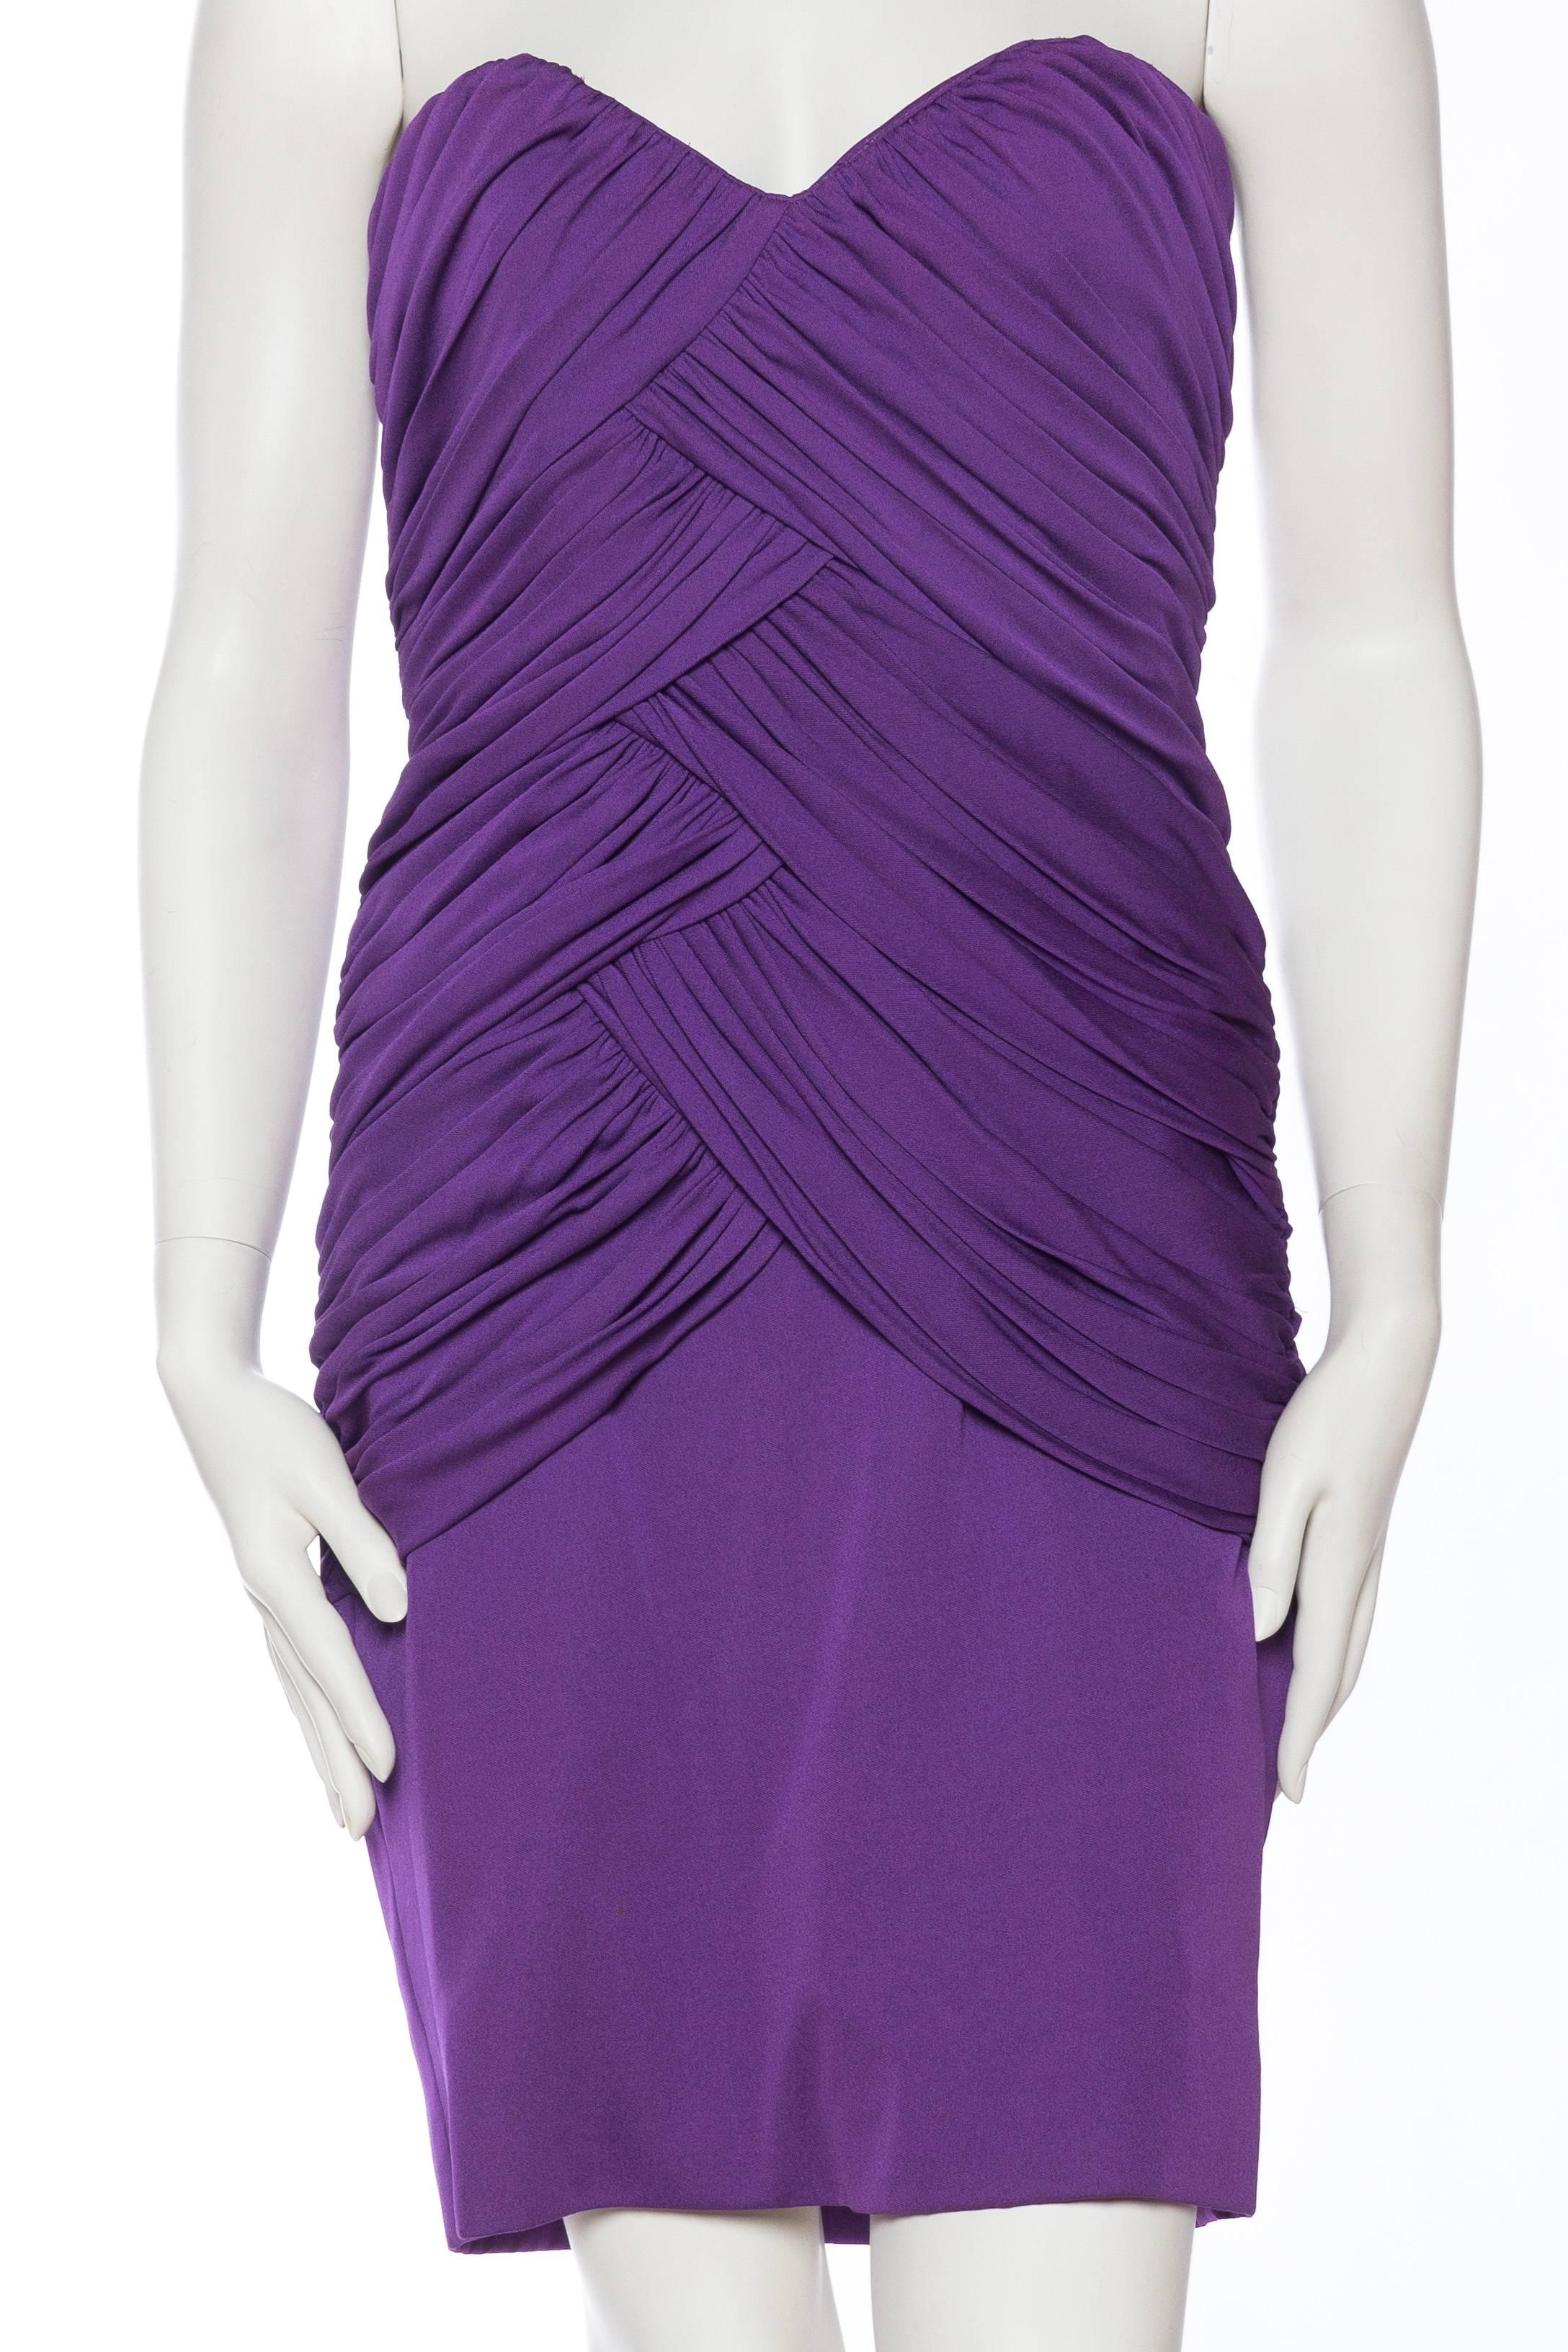 Built on a boned internal corset with a waist stay to keep the dress from riding down, fully lined. 1980S FABIAN MOLINA Purple Rayon Jersey Draped Strapless Cocktail Dress 